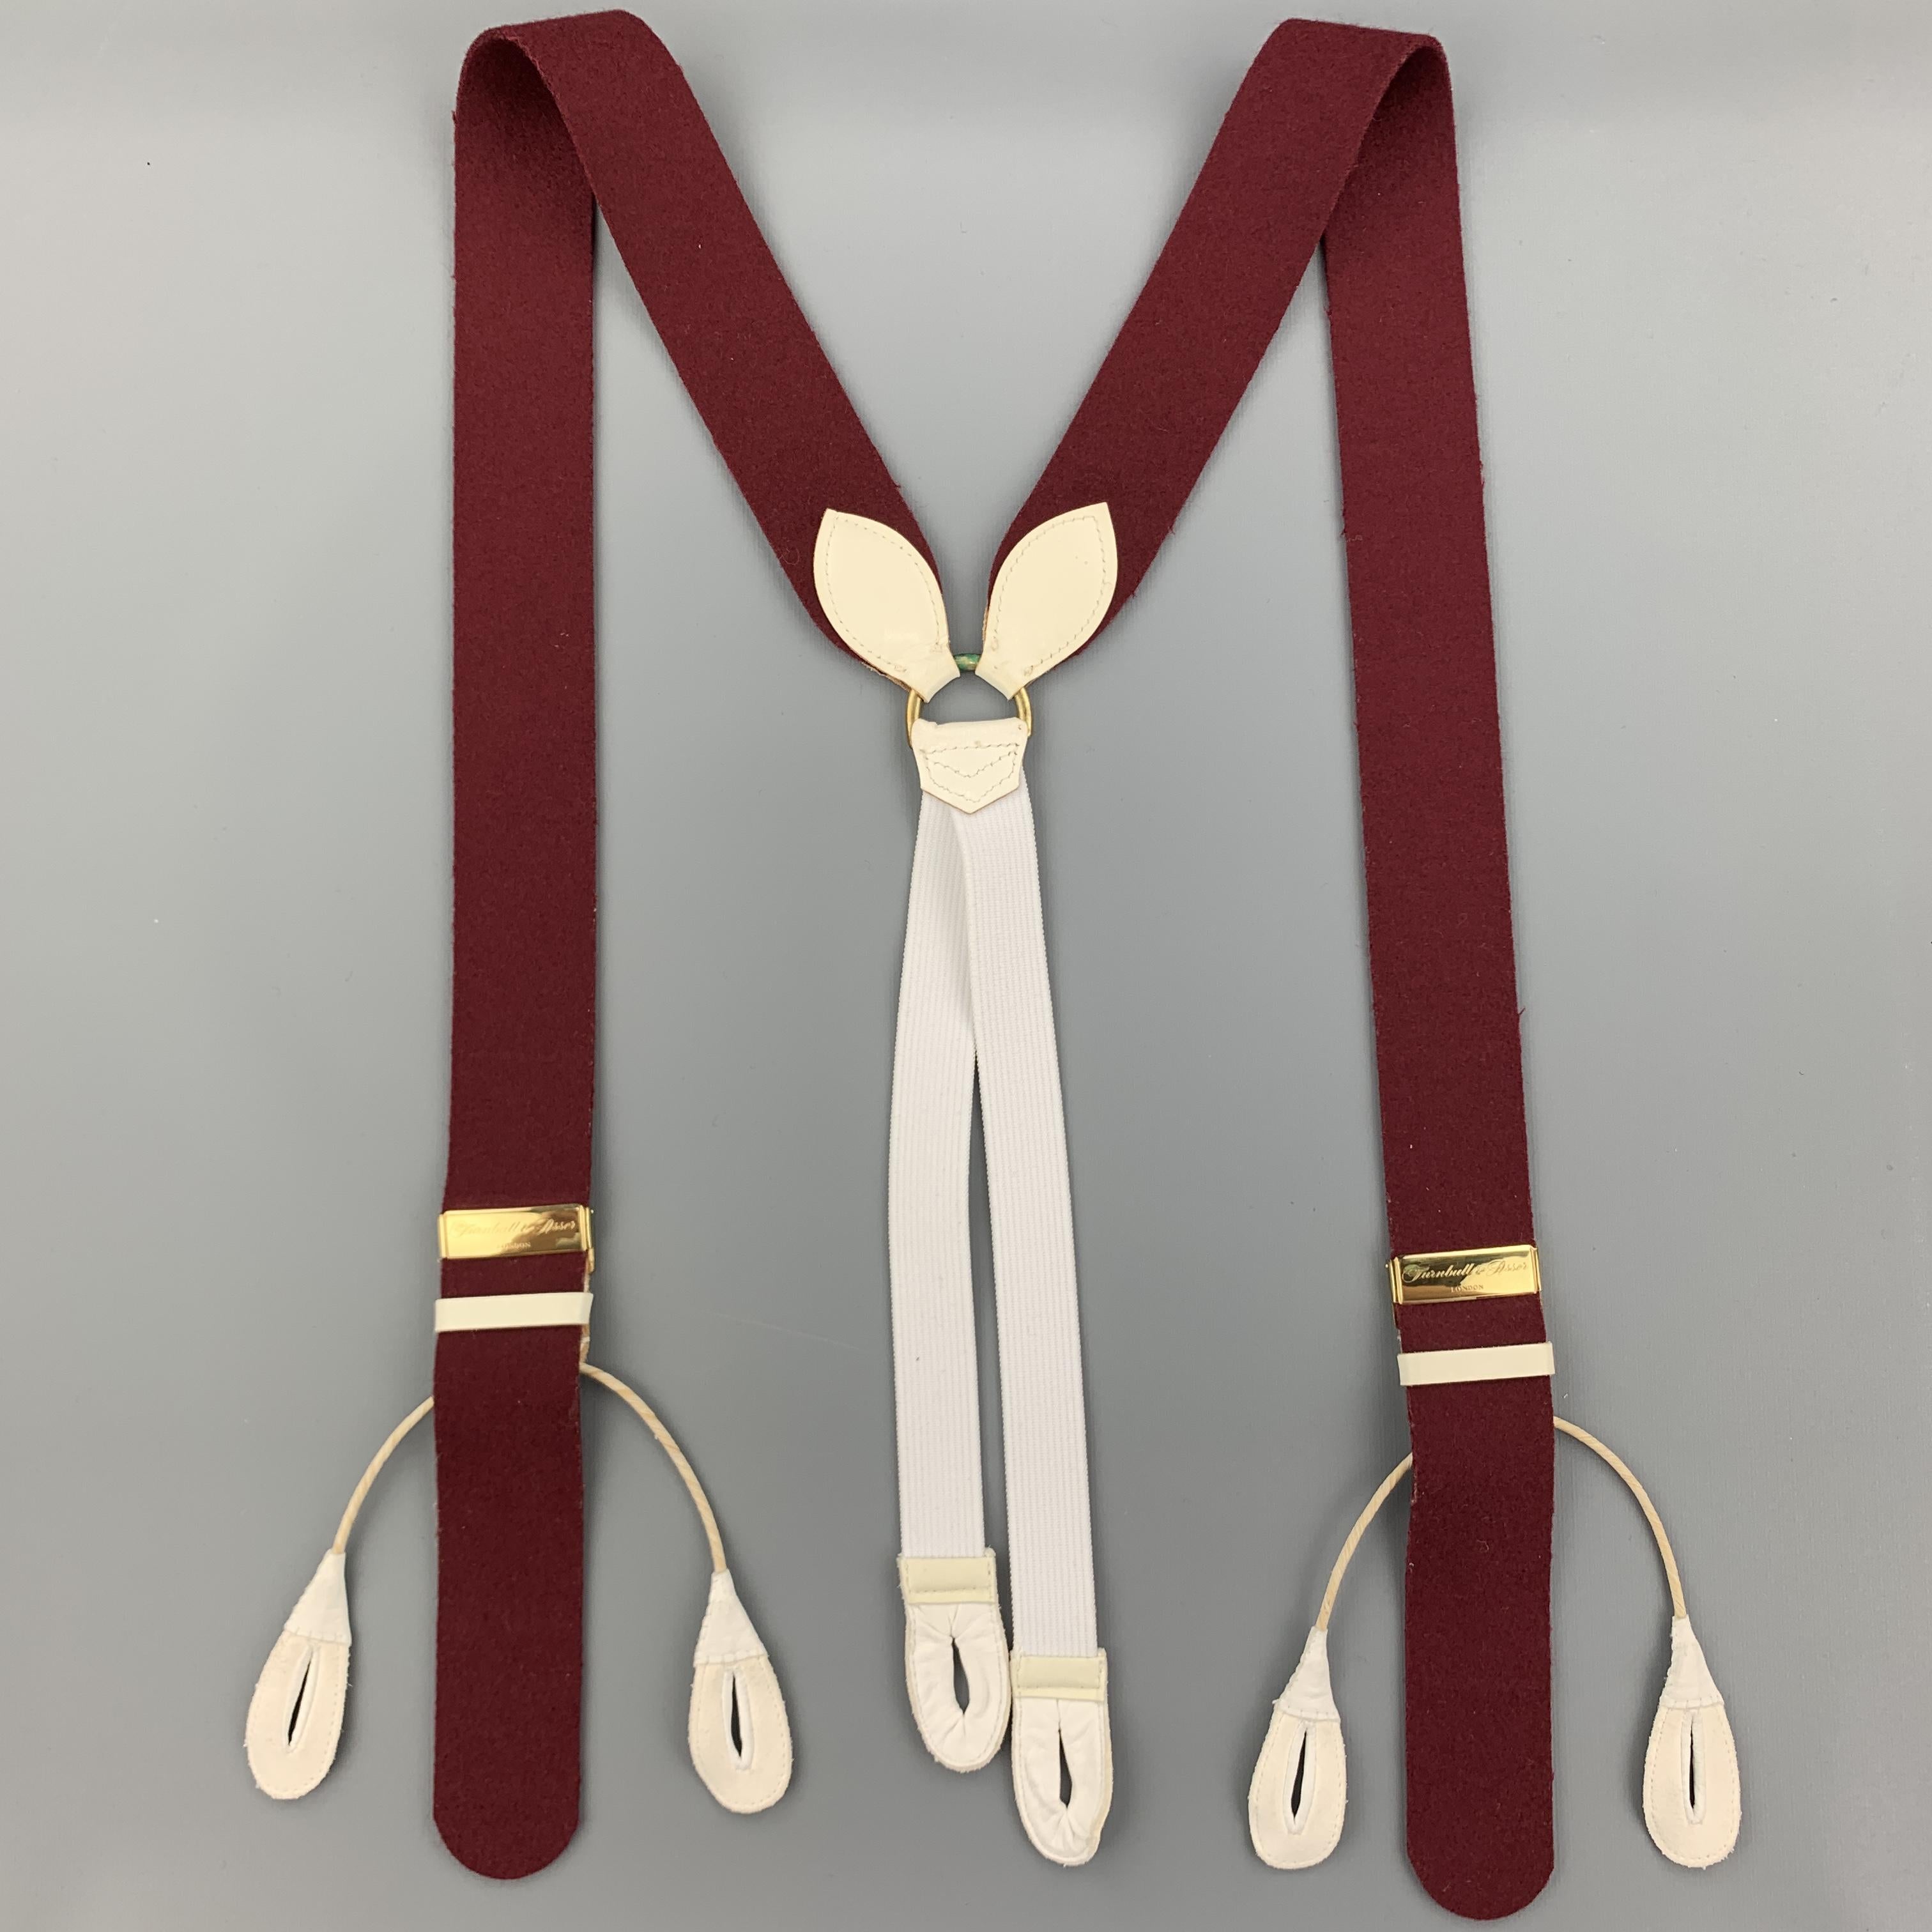 TURNBULL & ASSER suspenders comes in a burgundy wool featuring a adjustable fit, leather trim, and includes trouser buttons. Made in England.

Excellent Pre-Owned Condition:

Measurements:

Width: 1.5 in.